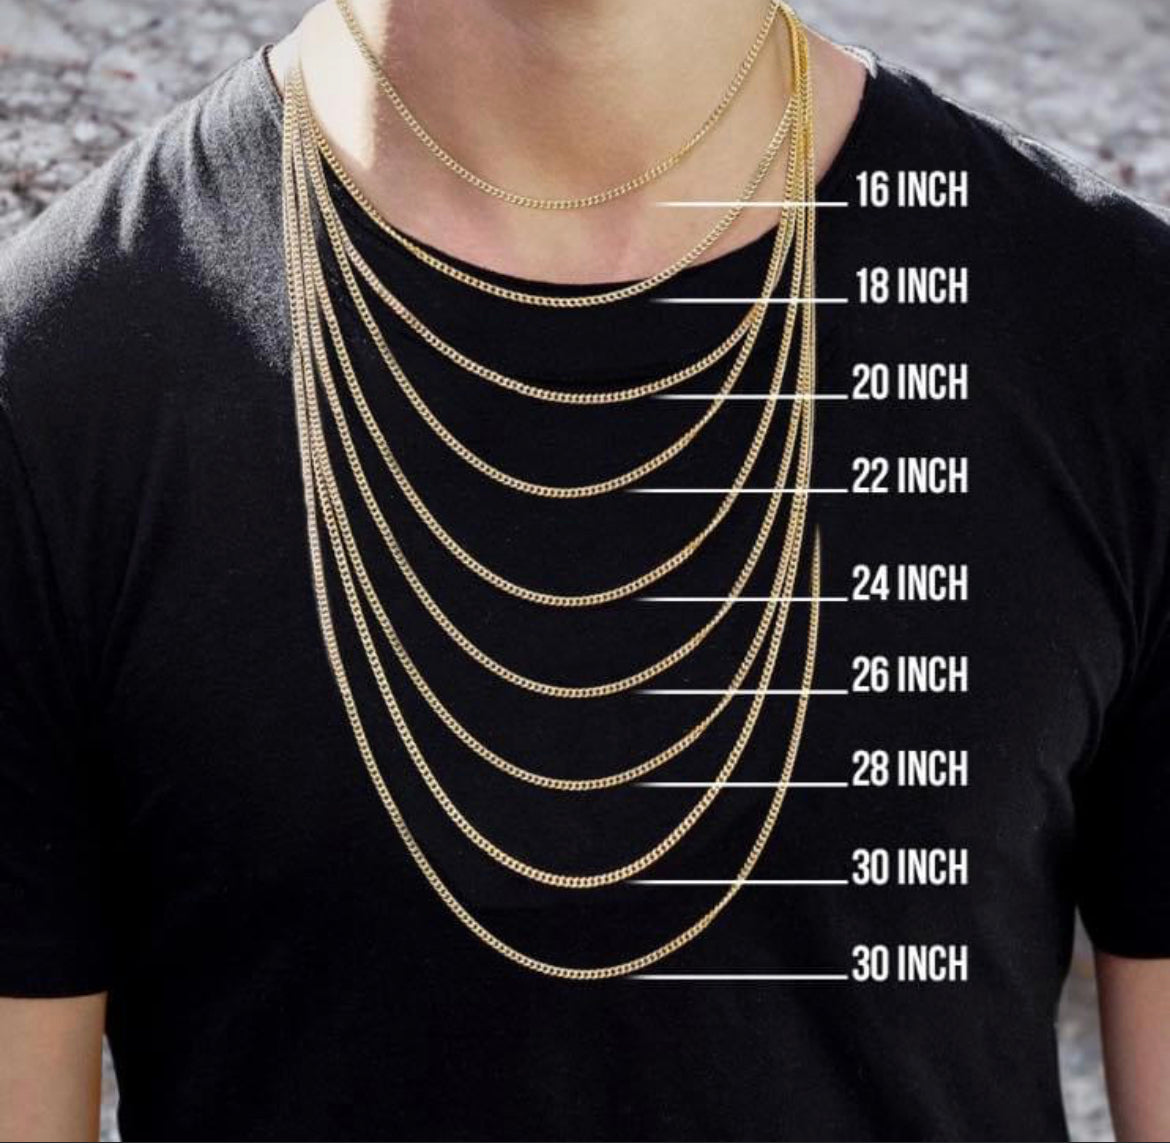 10K Gold- Ice Chain (Rose Gold)